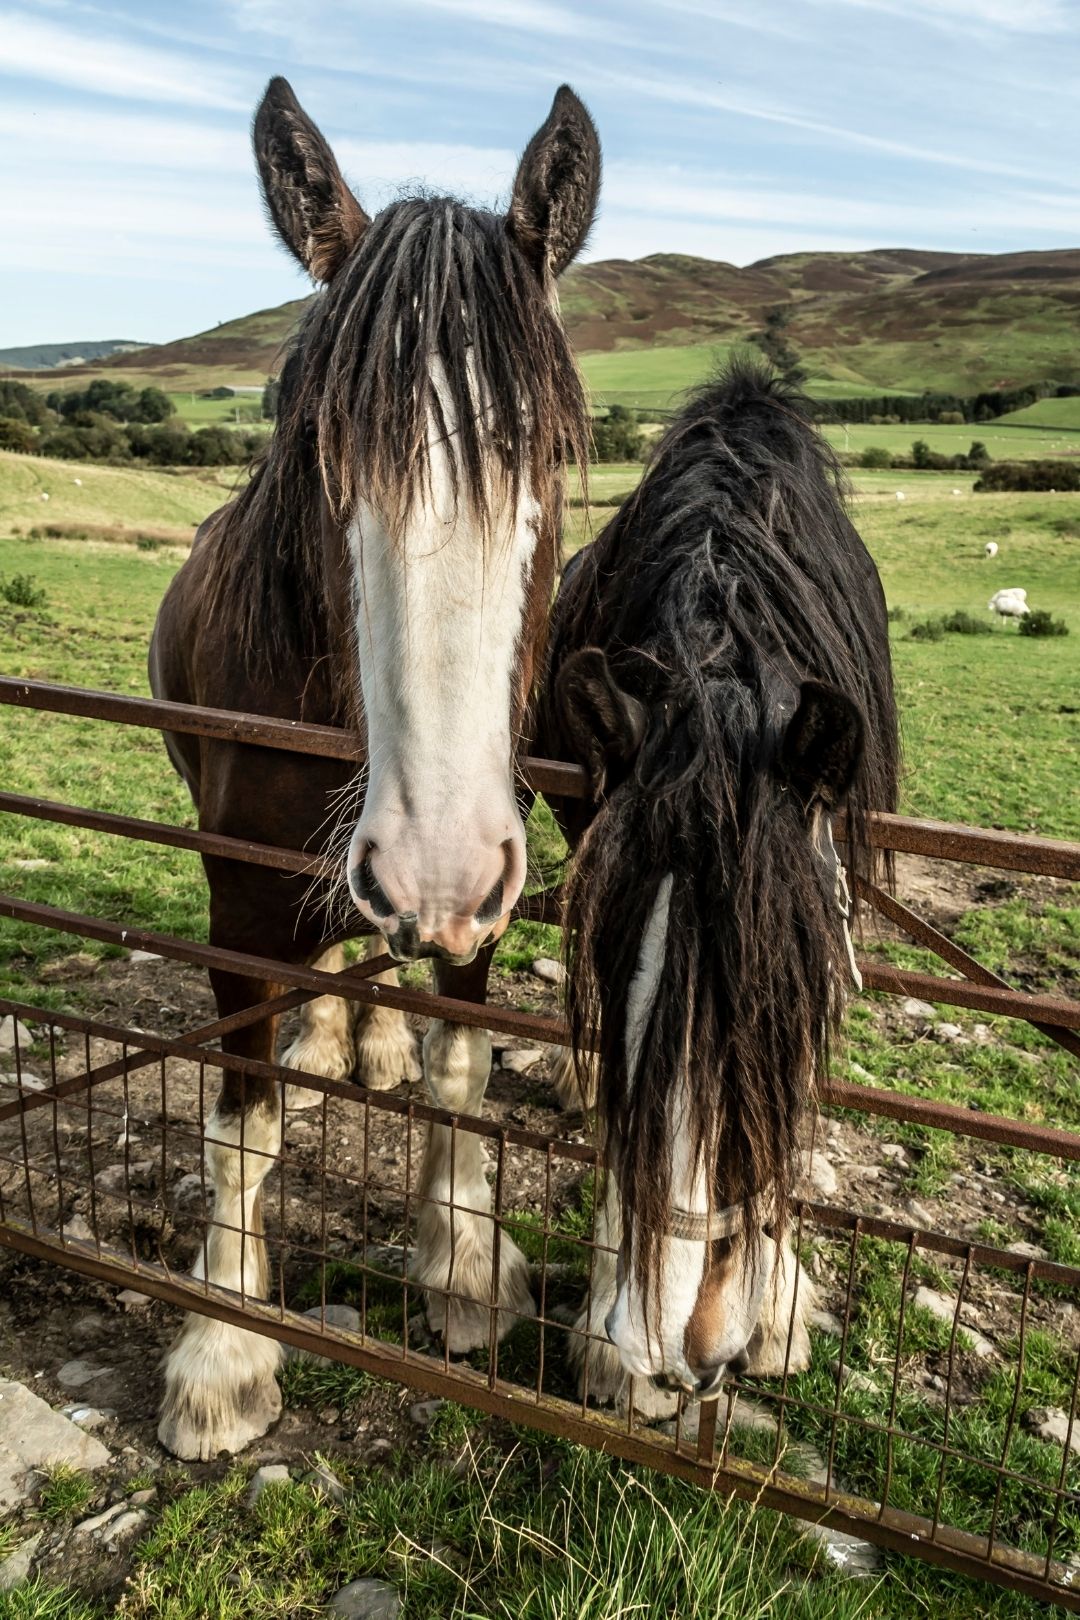 Two black and white Clydesdale horses in a field